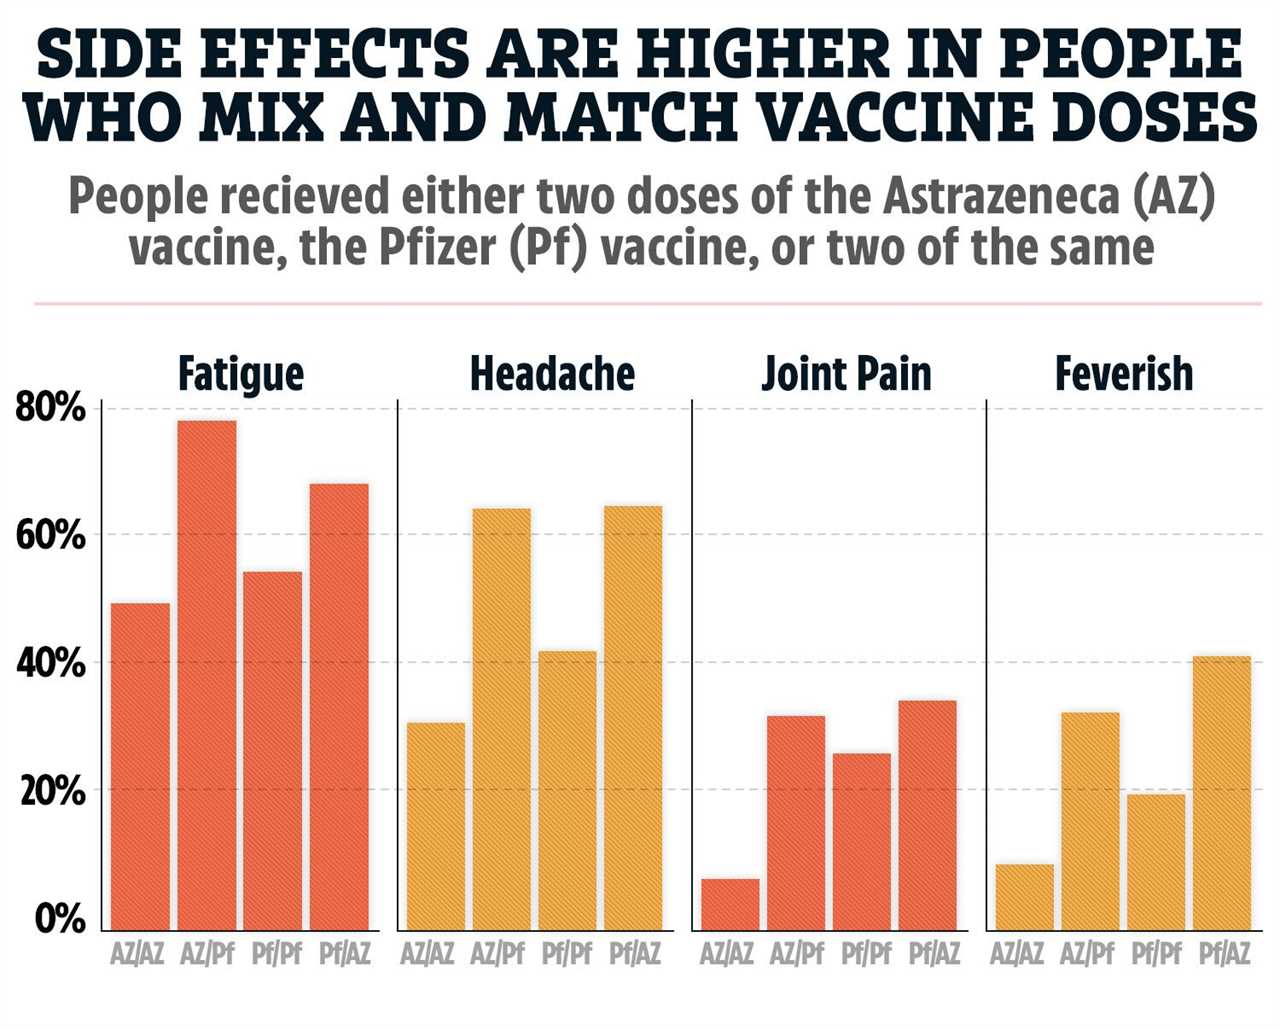 Mixing AstraZeneca and Pfizer jabs is safe but might trigger more side effects, first study finds